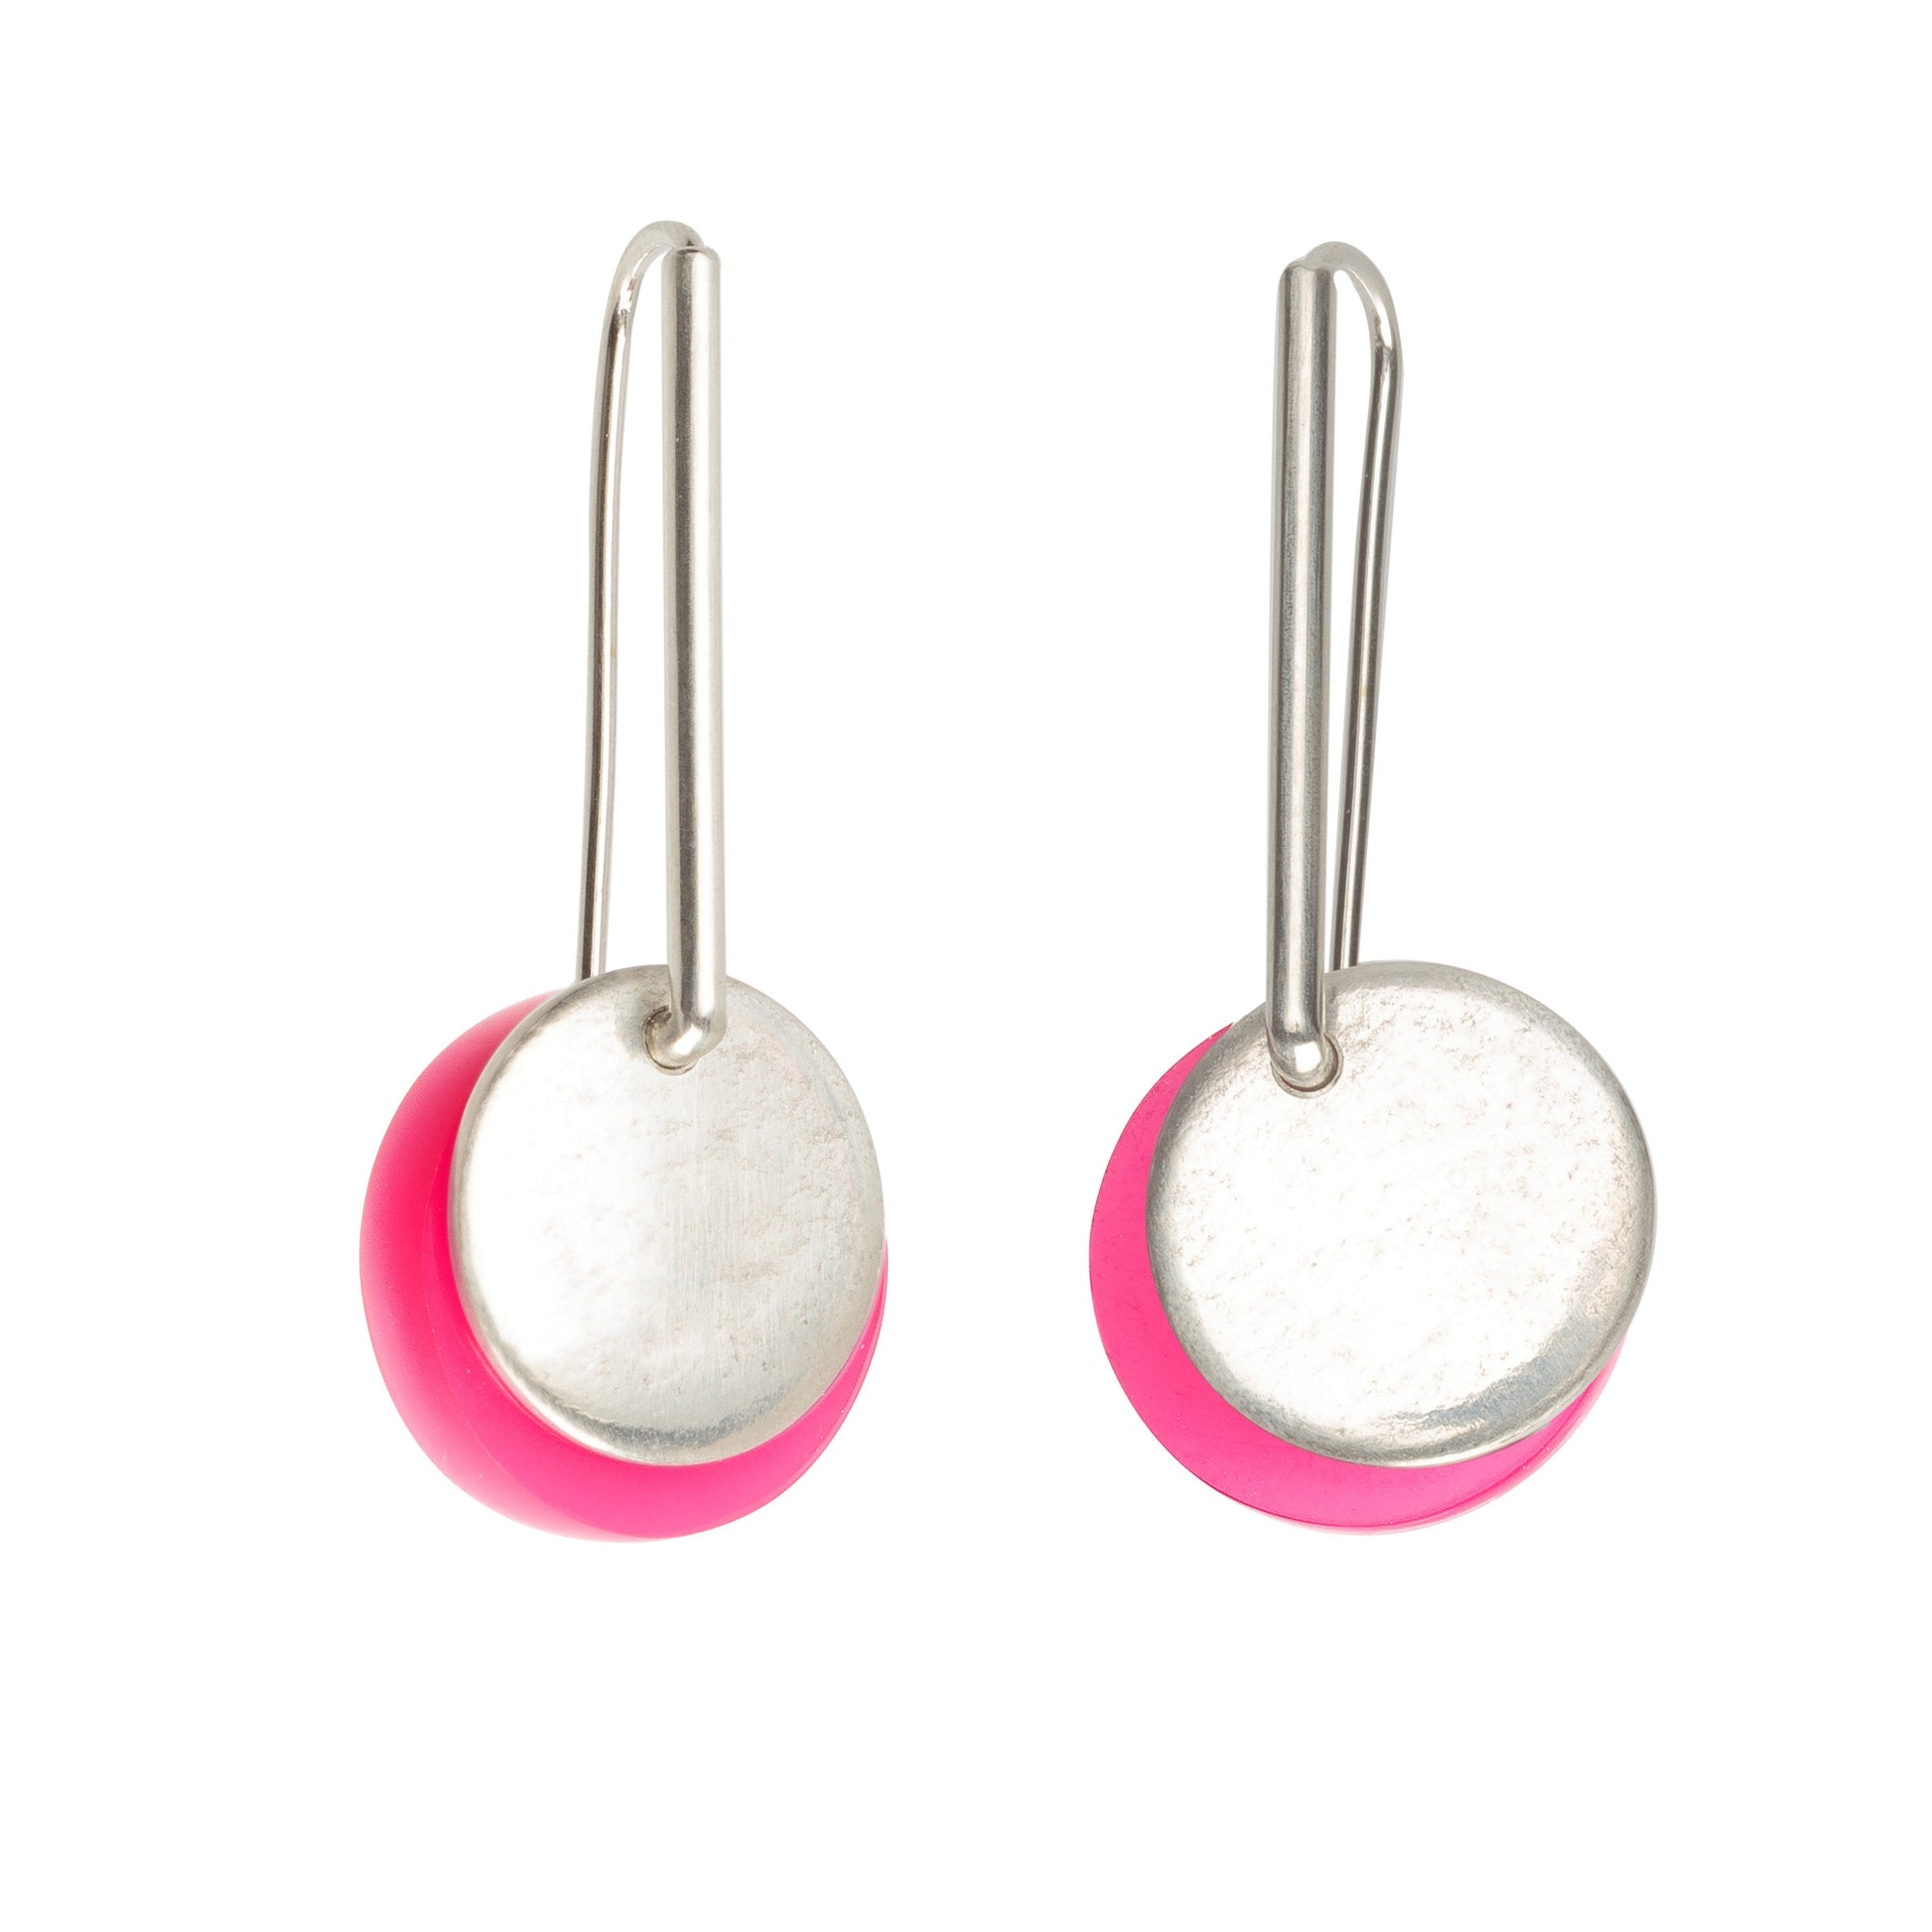 Silver and pink perspex earrings www.barbaraspence.co.uk